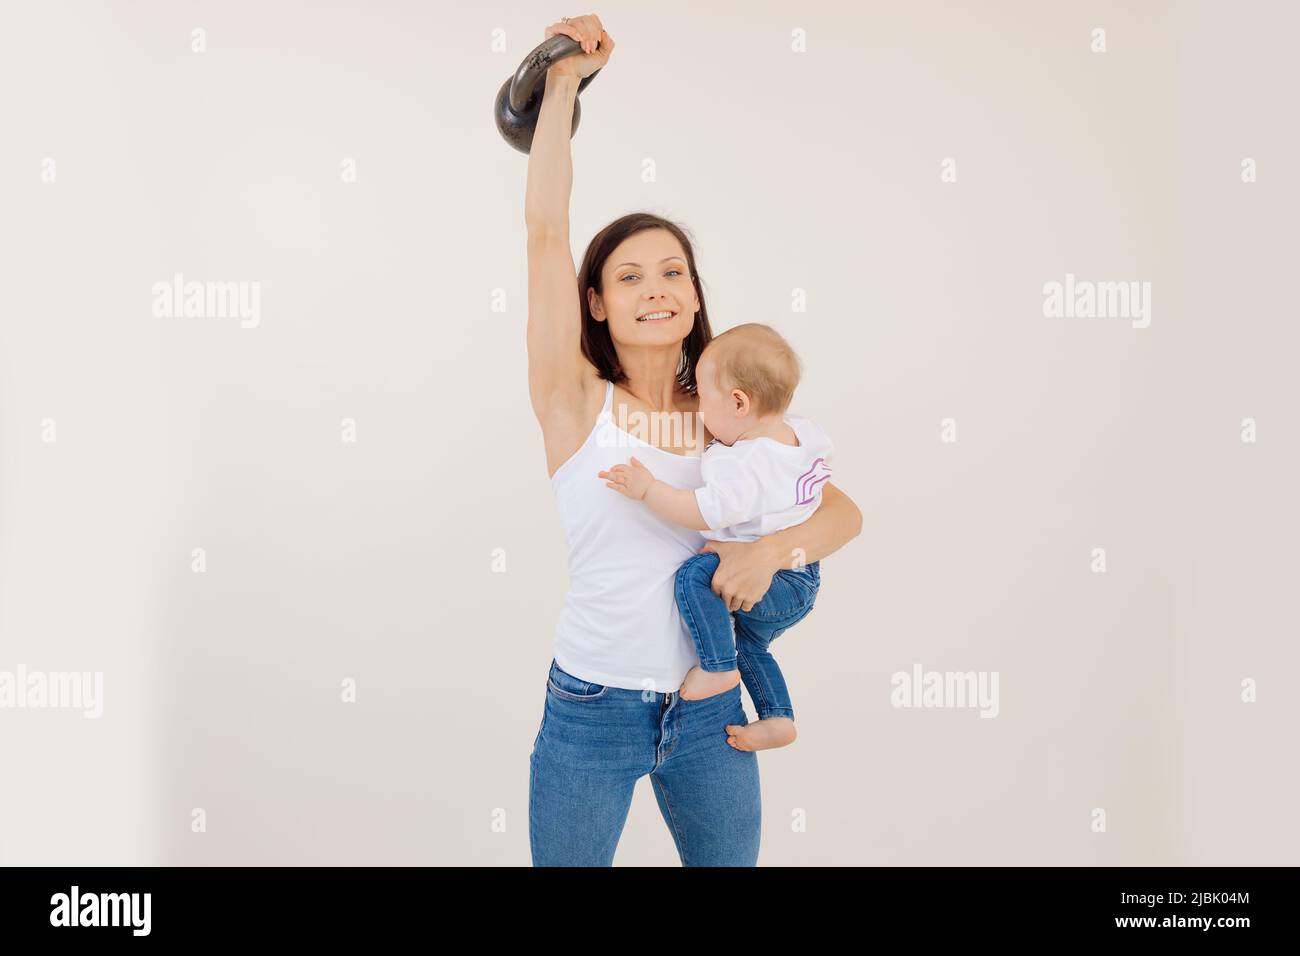 Young athletic smiling woman lifting up kettlebell and holding little ...